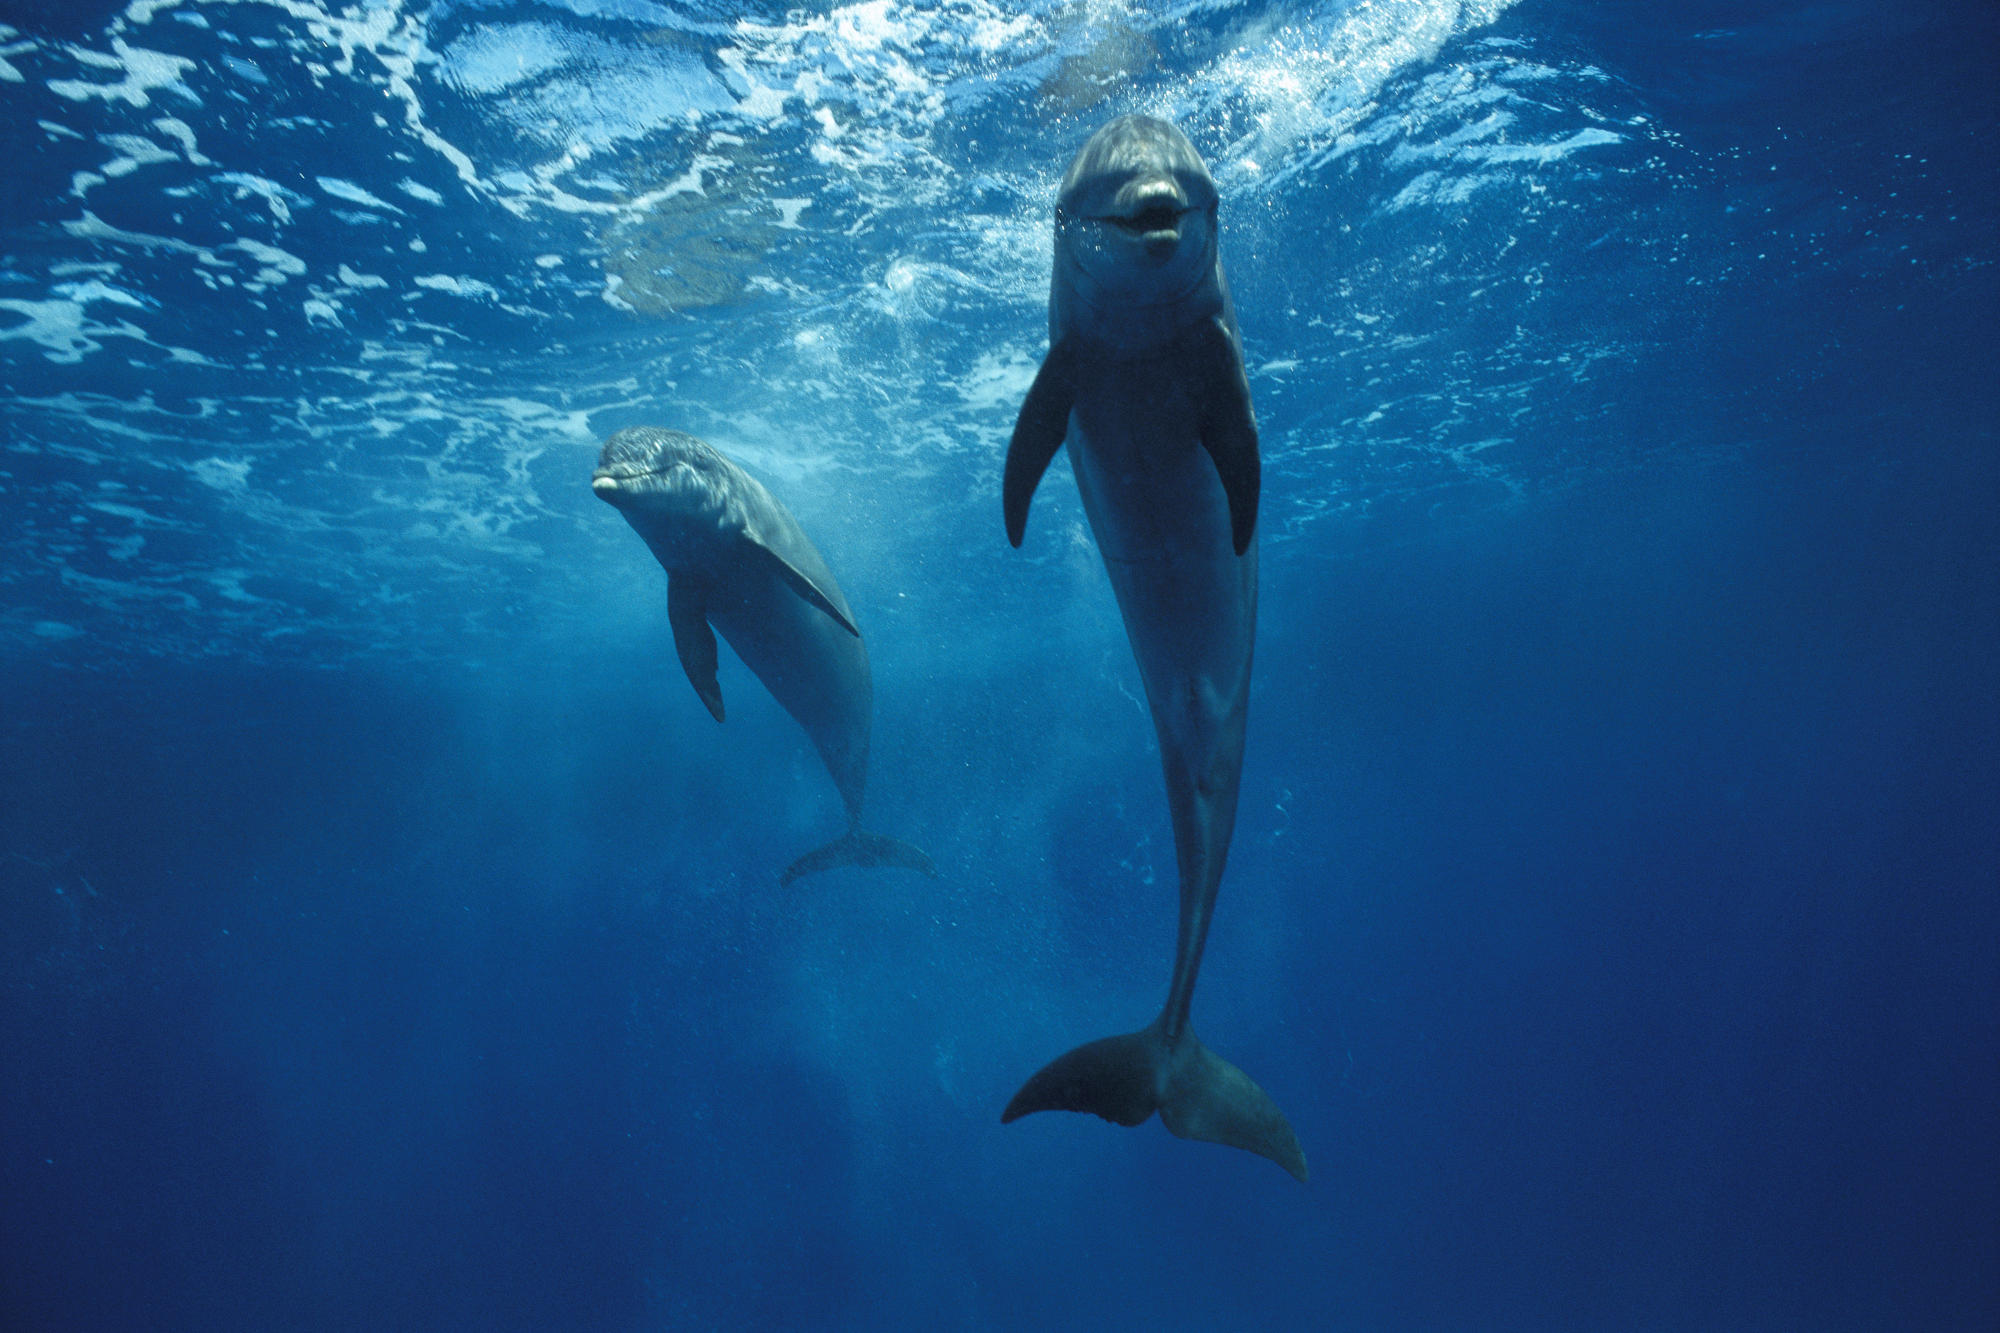 dolphins at play